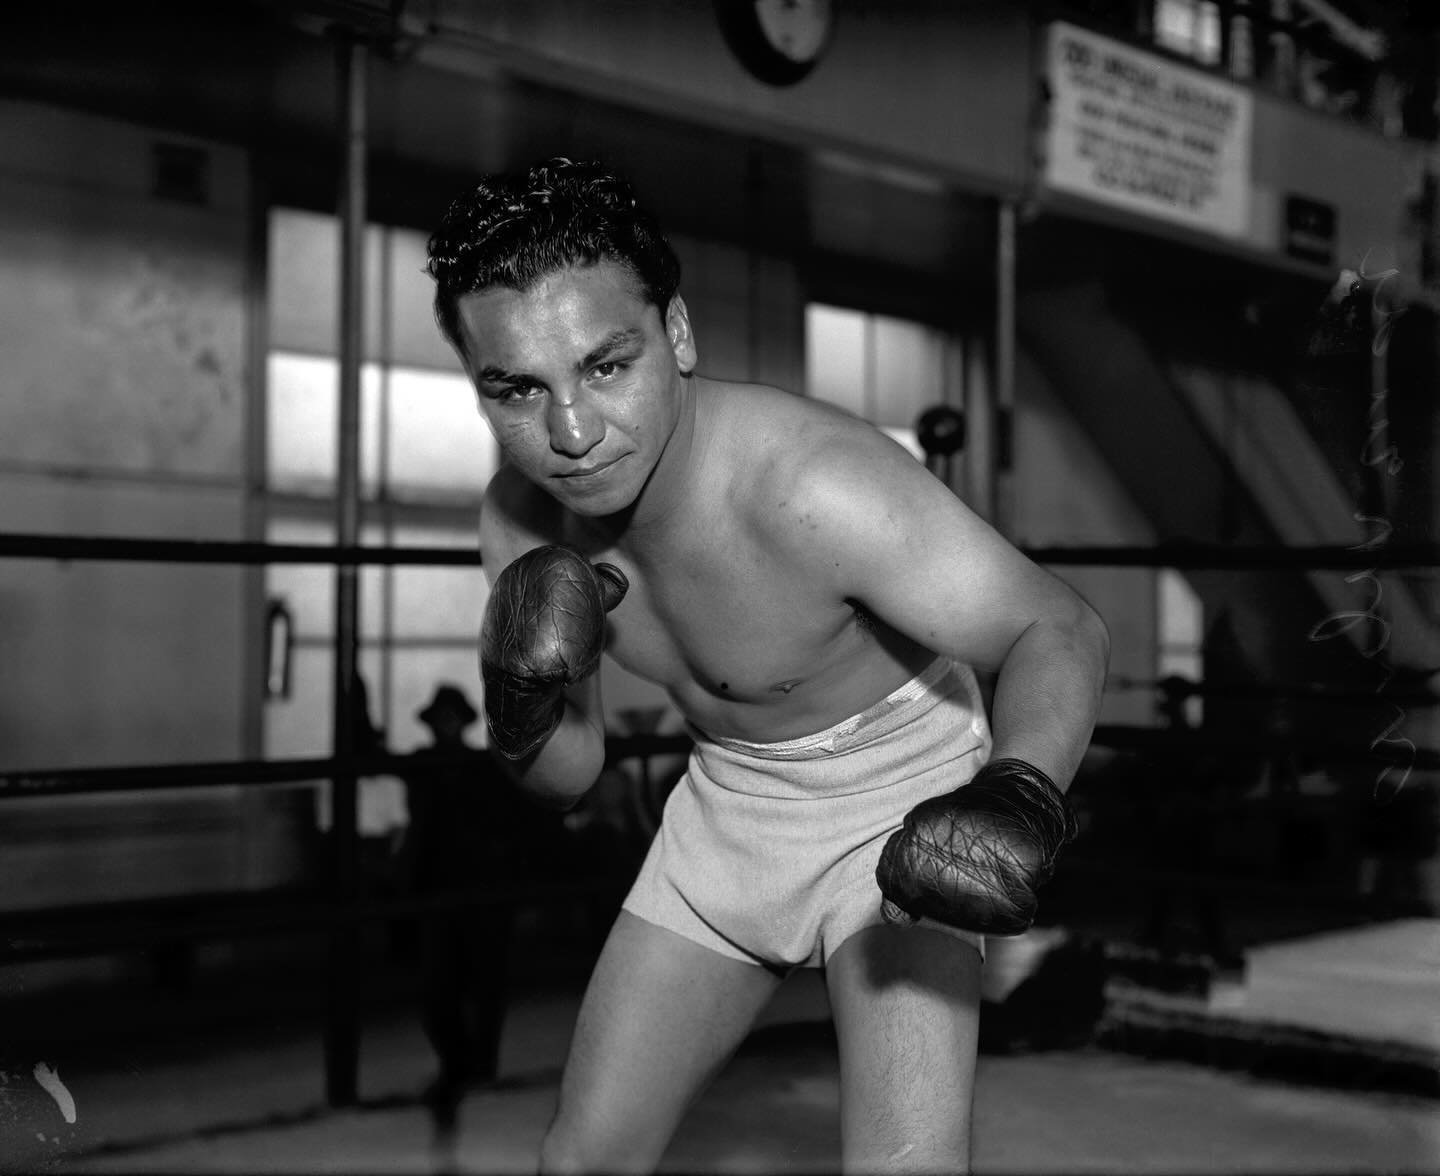 Alberto &ldquo;Baby&rdquo; Arizmendi was born in Tamalpuis Mexico in 1914 and purportedly started boxing before he turned 10 years old. He fought often at the Olympic and Hollywood Legion Stadium, and his memorable battles against Henry Armstrong hel